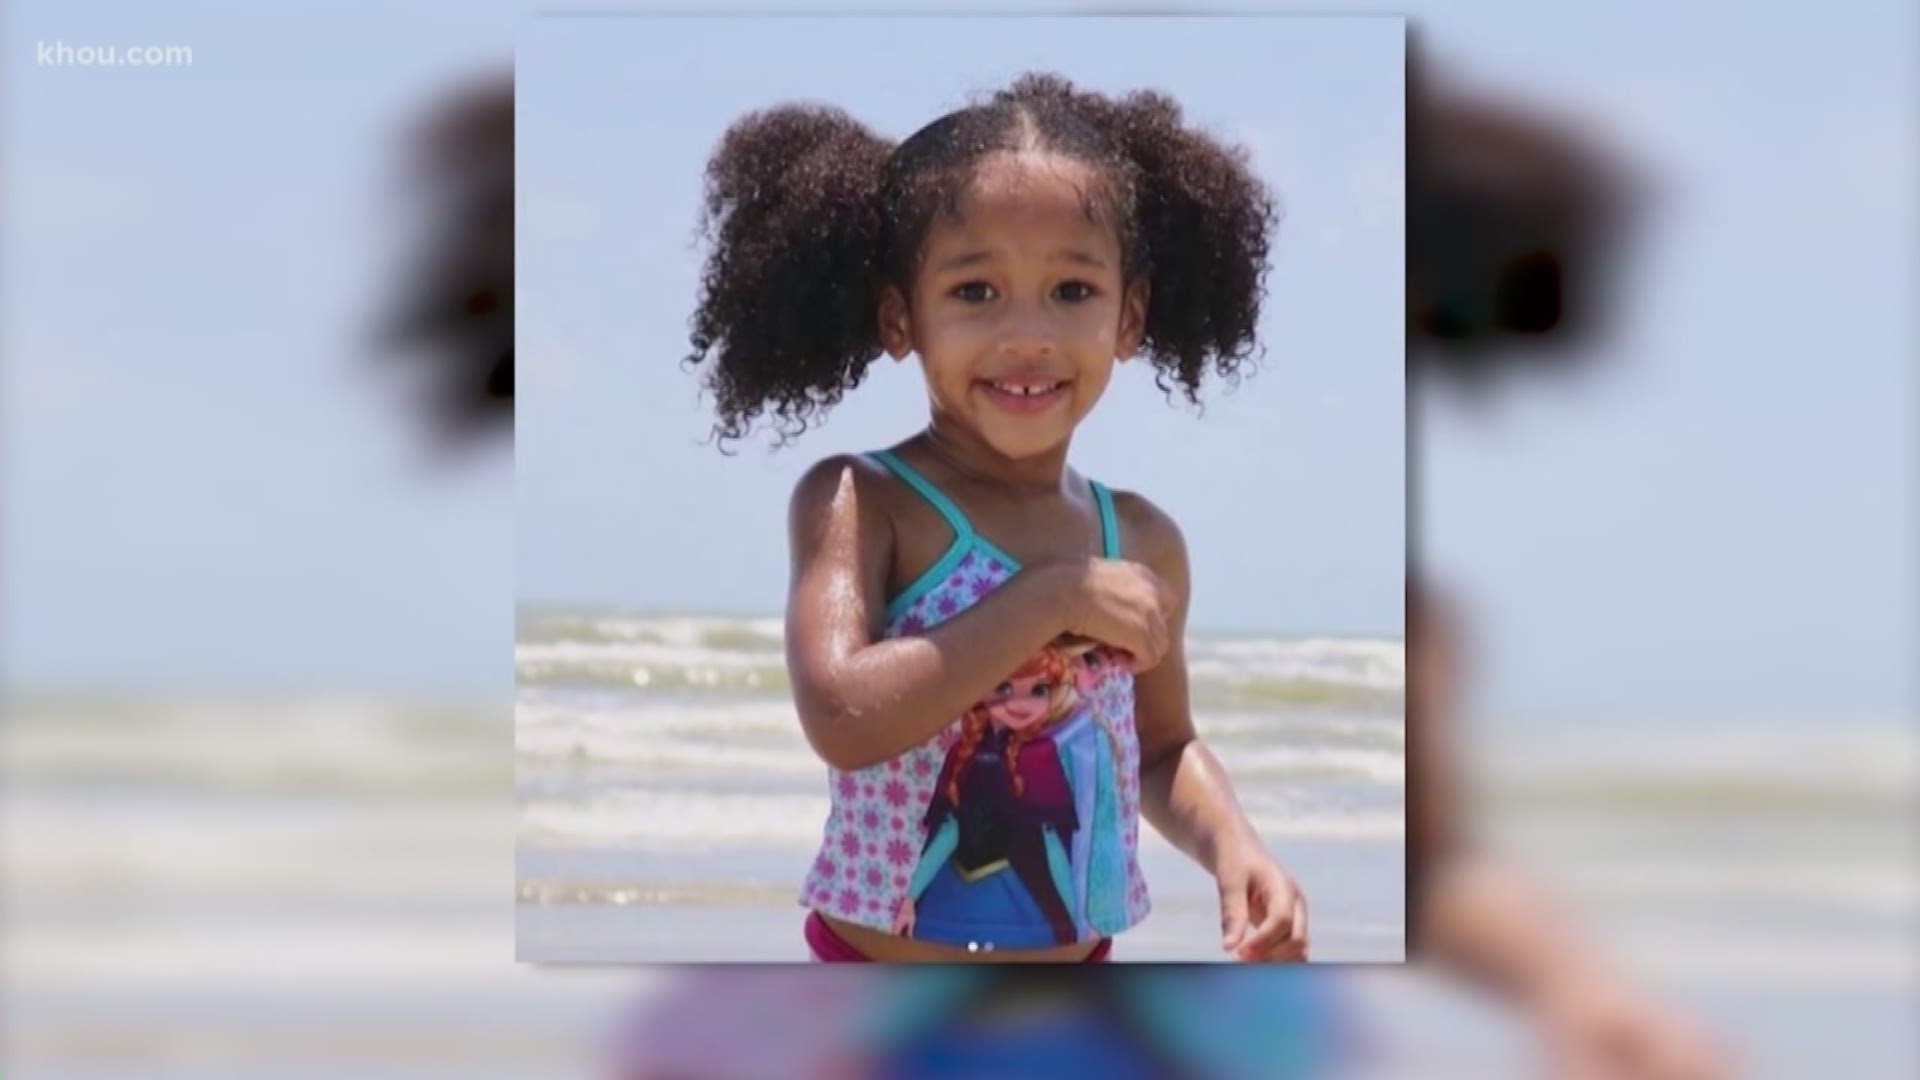 A new grand jury court document gives a better idea of what might have happened to 4-year-old Maleah Davis.